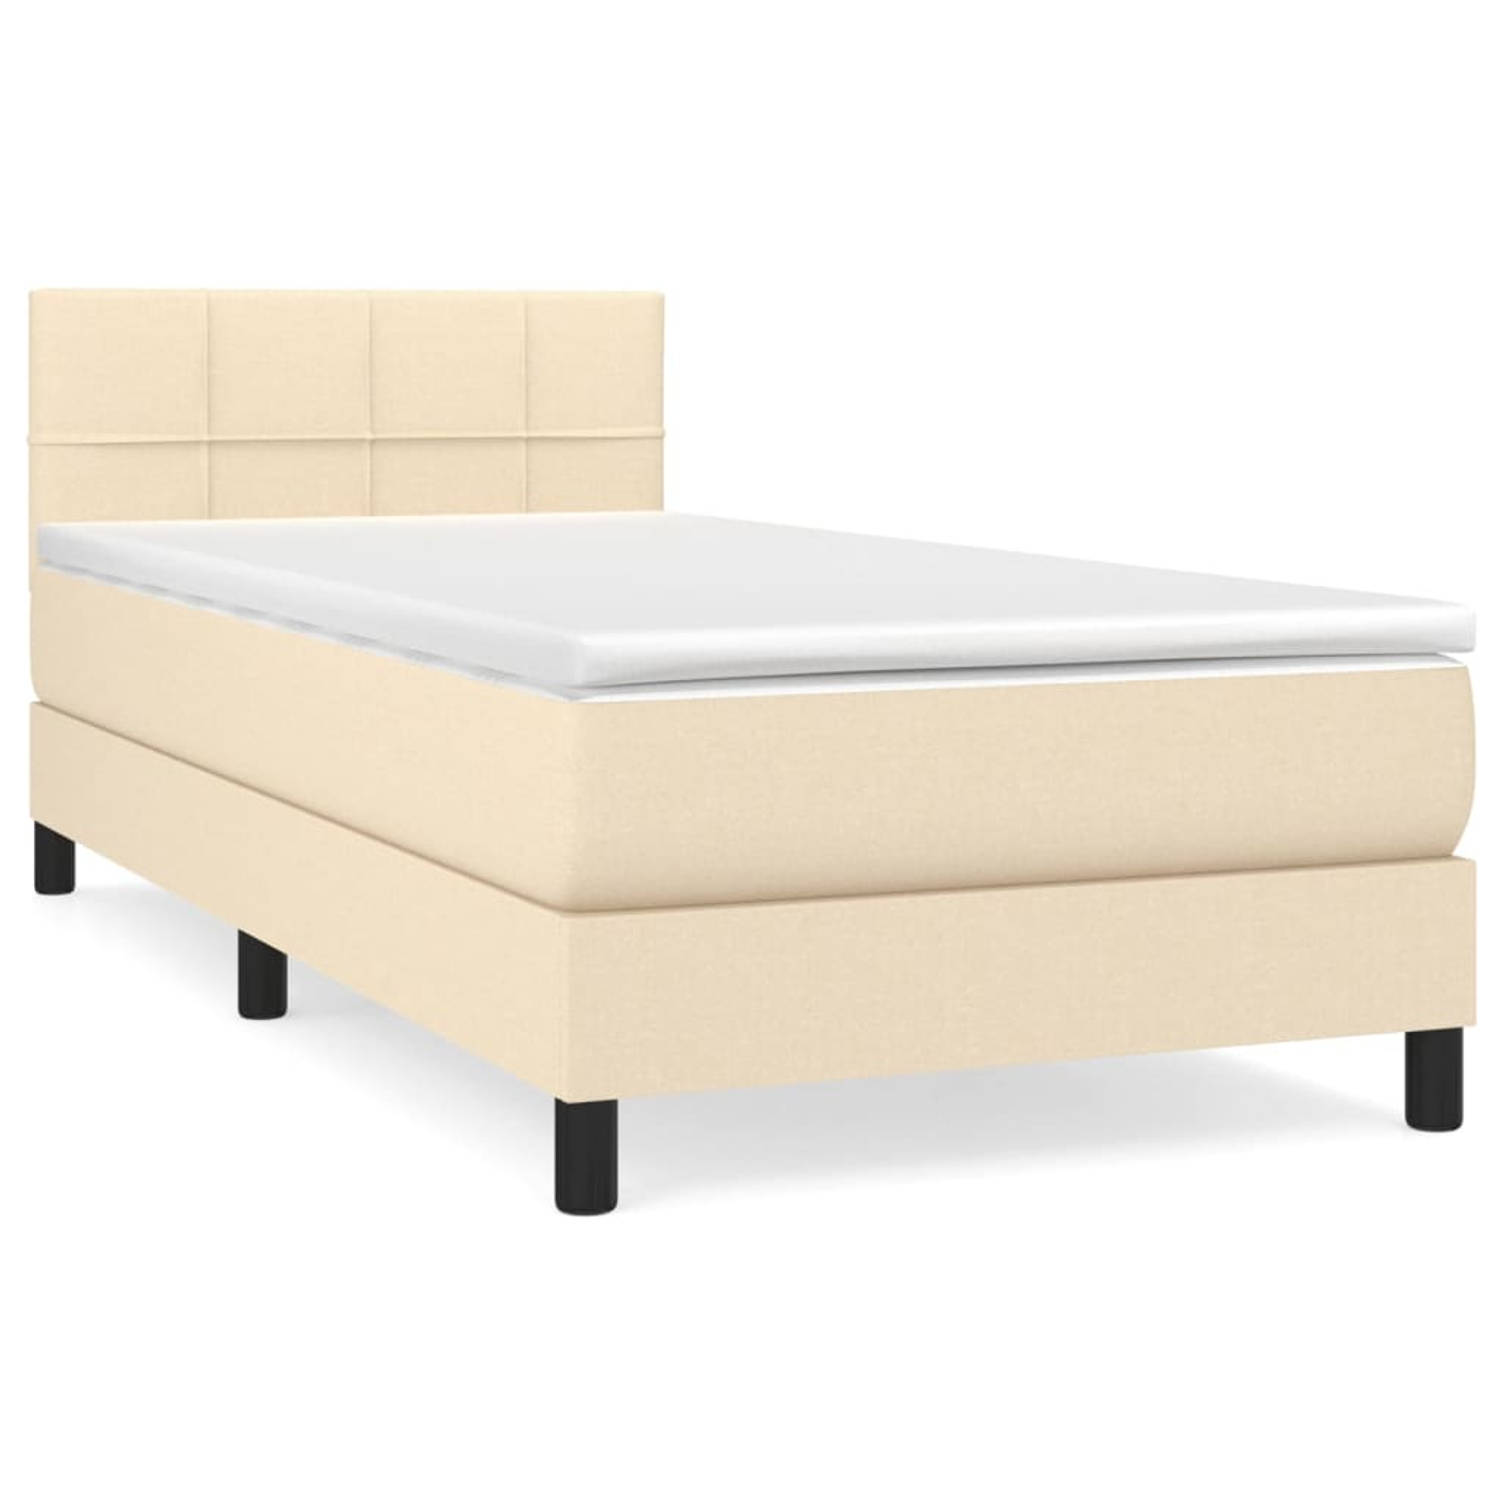 The Living Store Bed - Boxspring - Bed - 193 x 90 x 78/88 cm - Crème